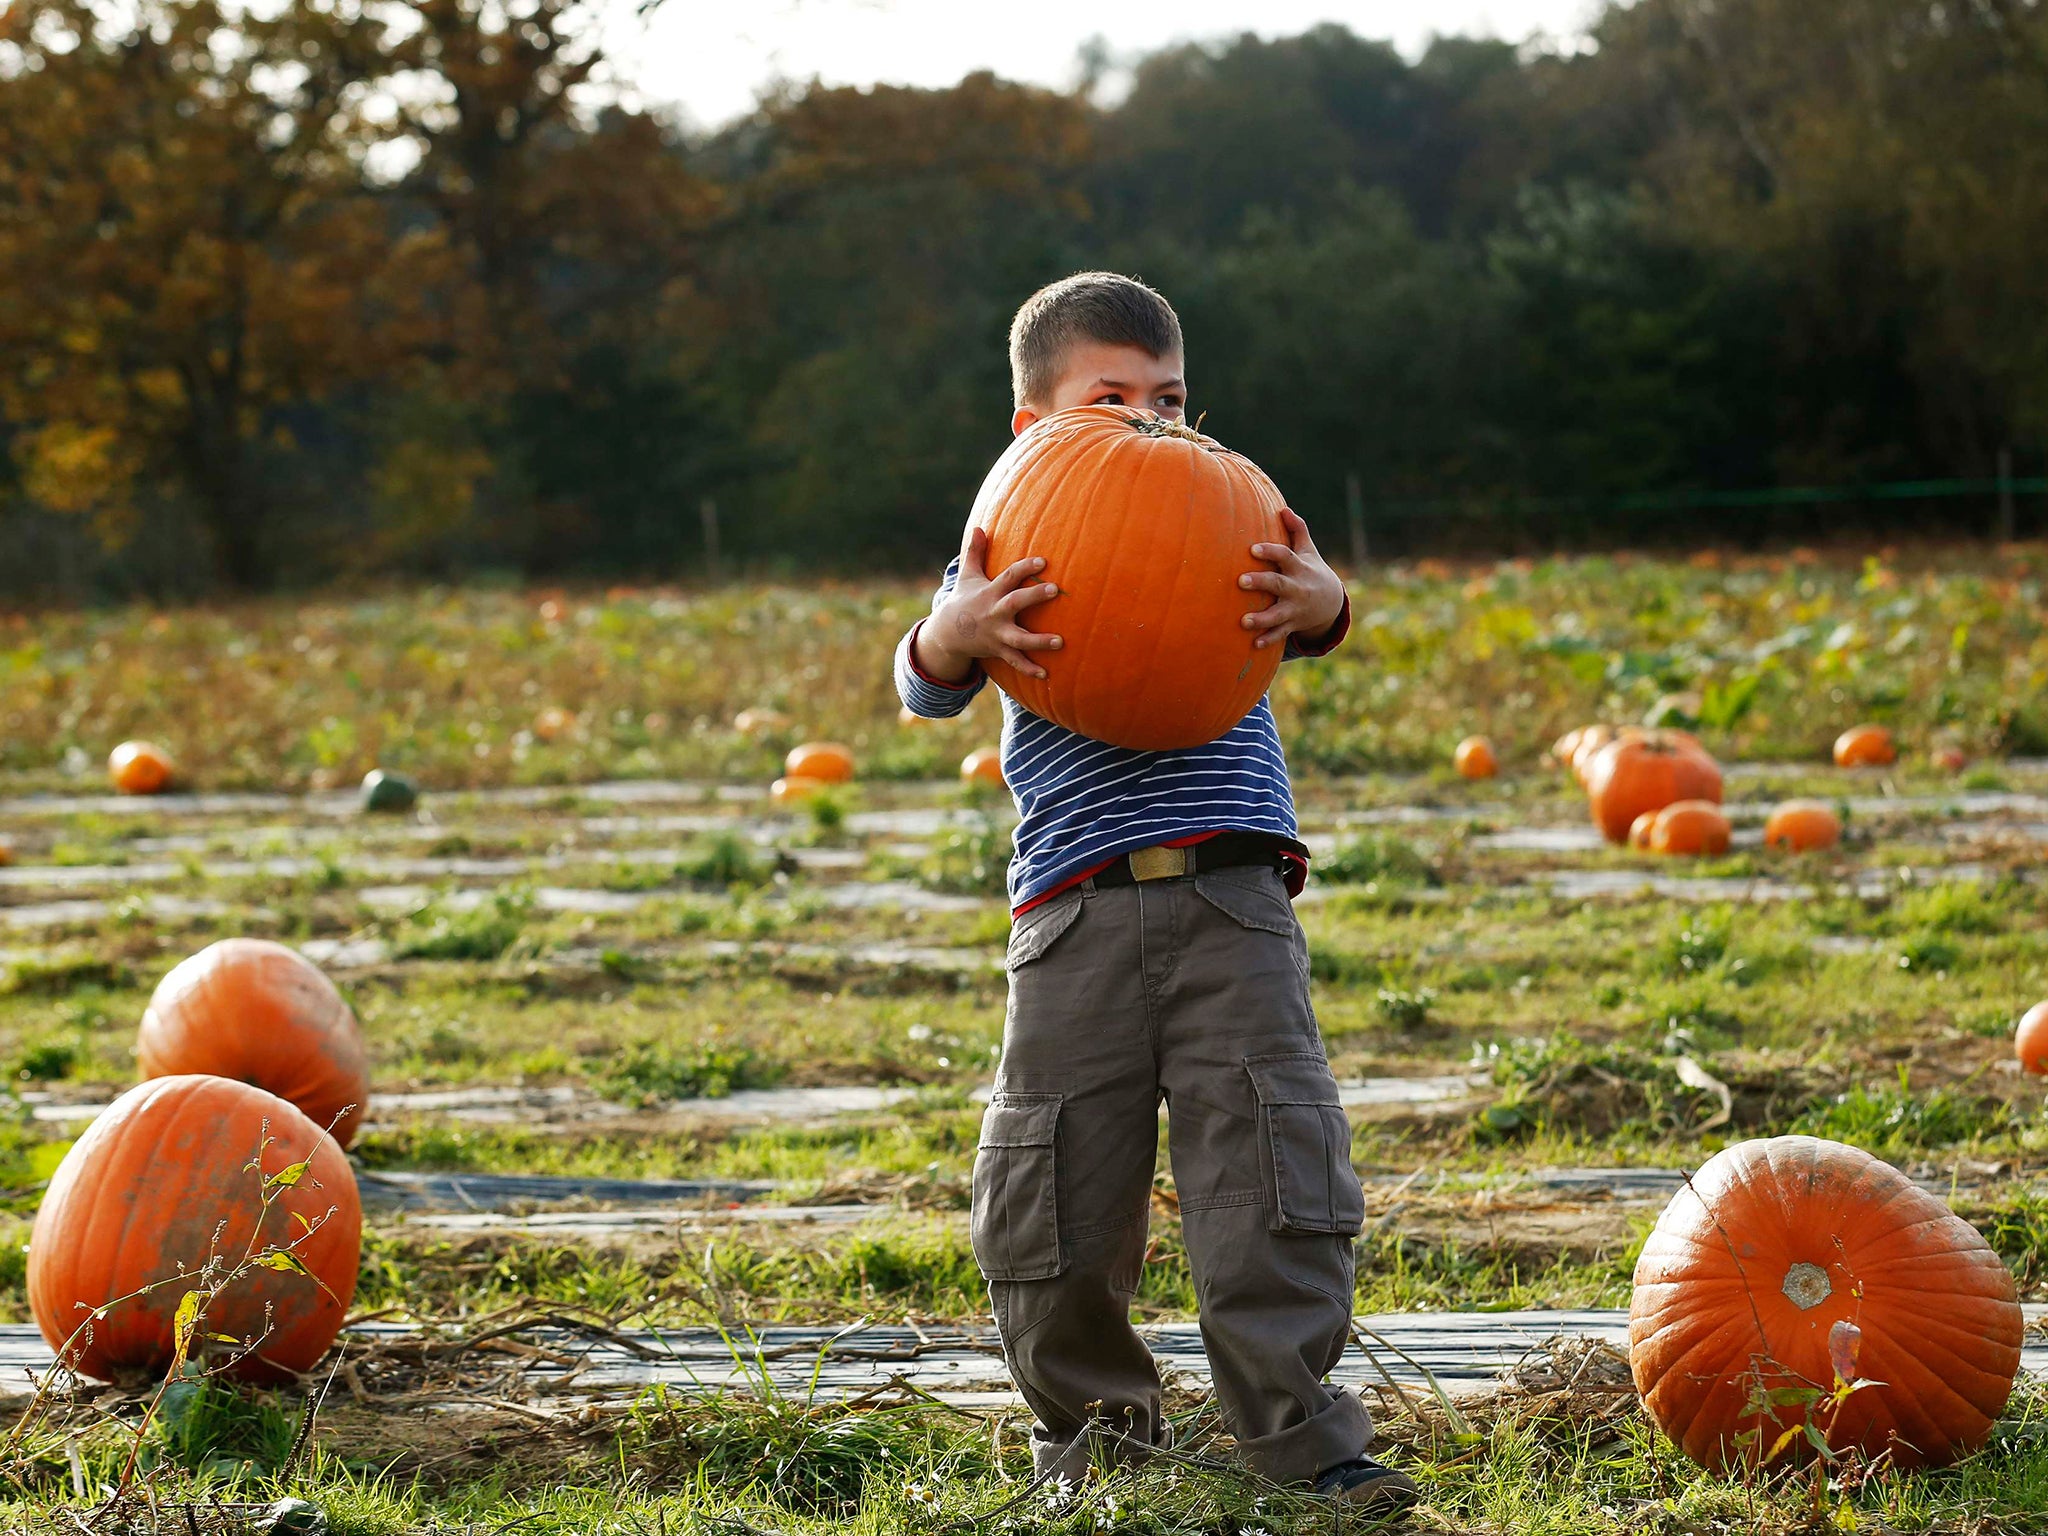 Five-year-old Carter struggles to lift a pumpkin at Tulleys Farm pumpkin patch during their Halloween festival, near Crawley